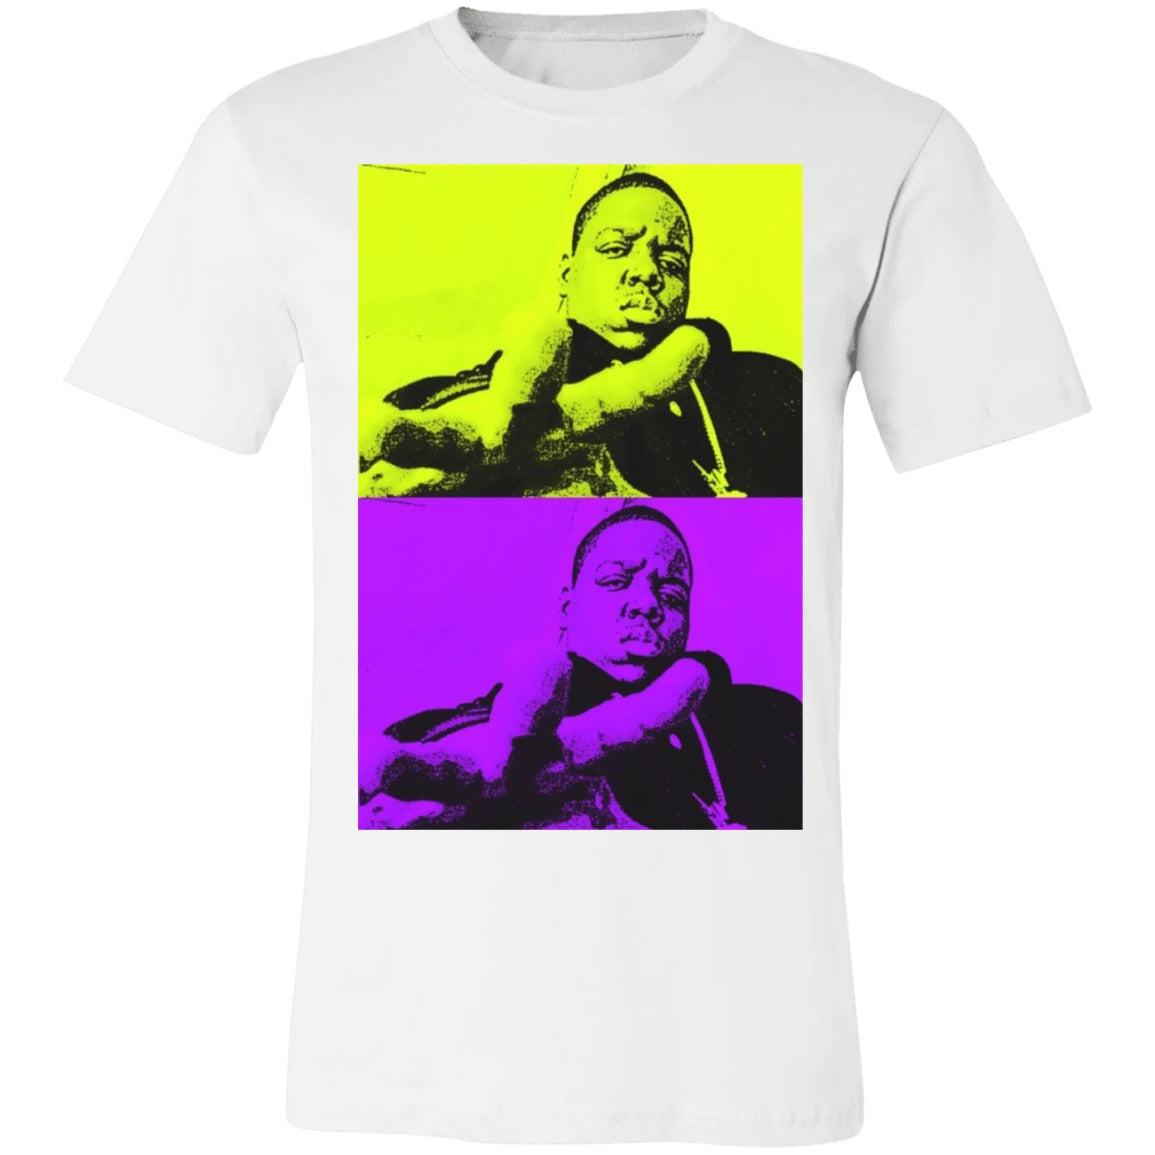 notorious big graphic tee in white, the top of the design is yellow  and the bottom is purple